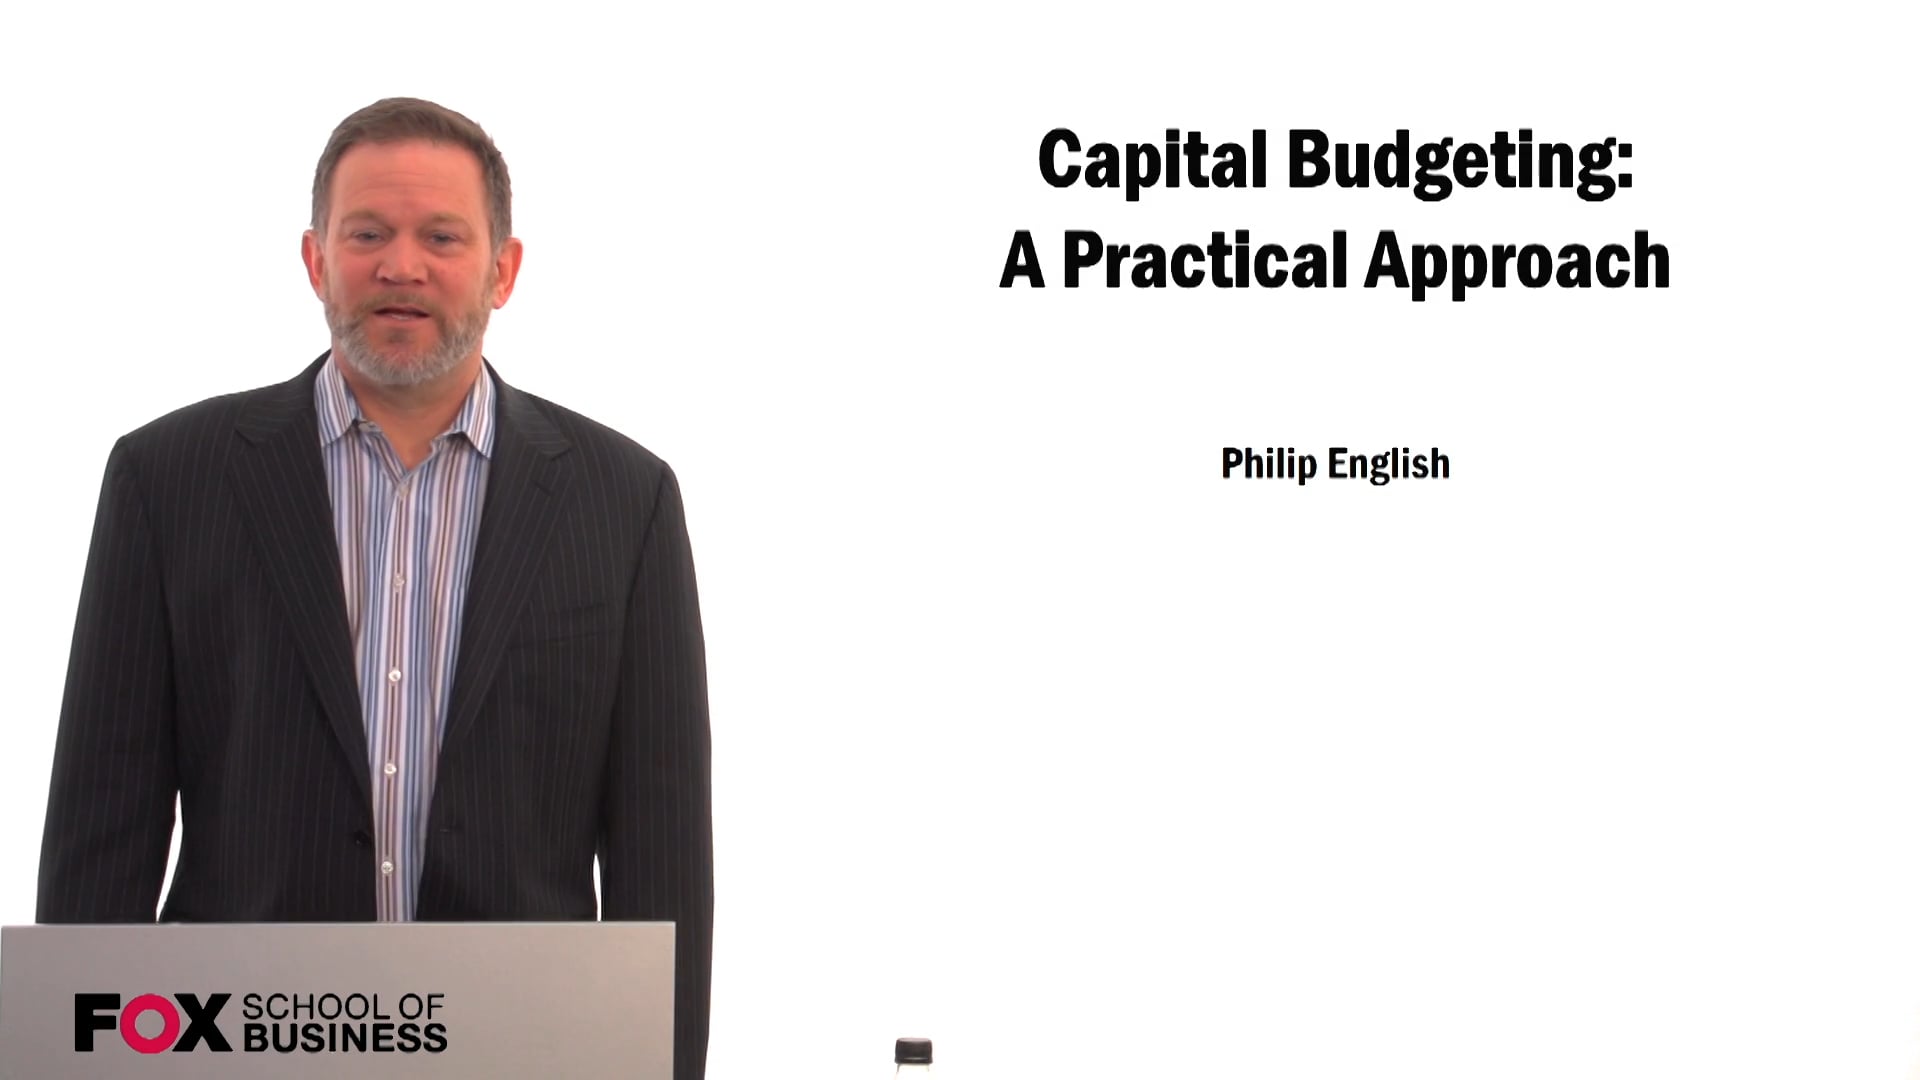 Capital Budgeting: A Practical Approach